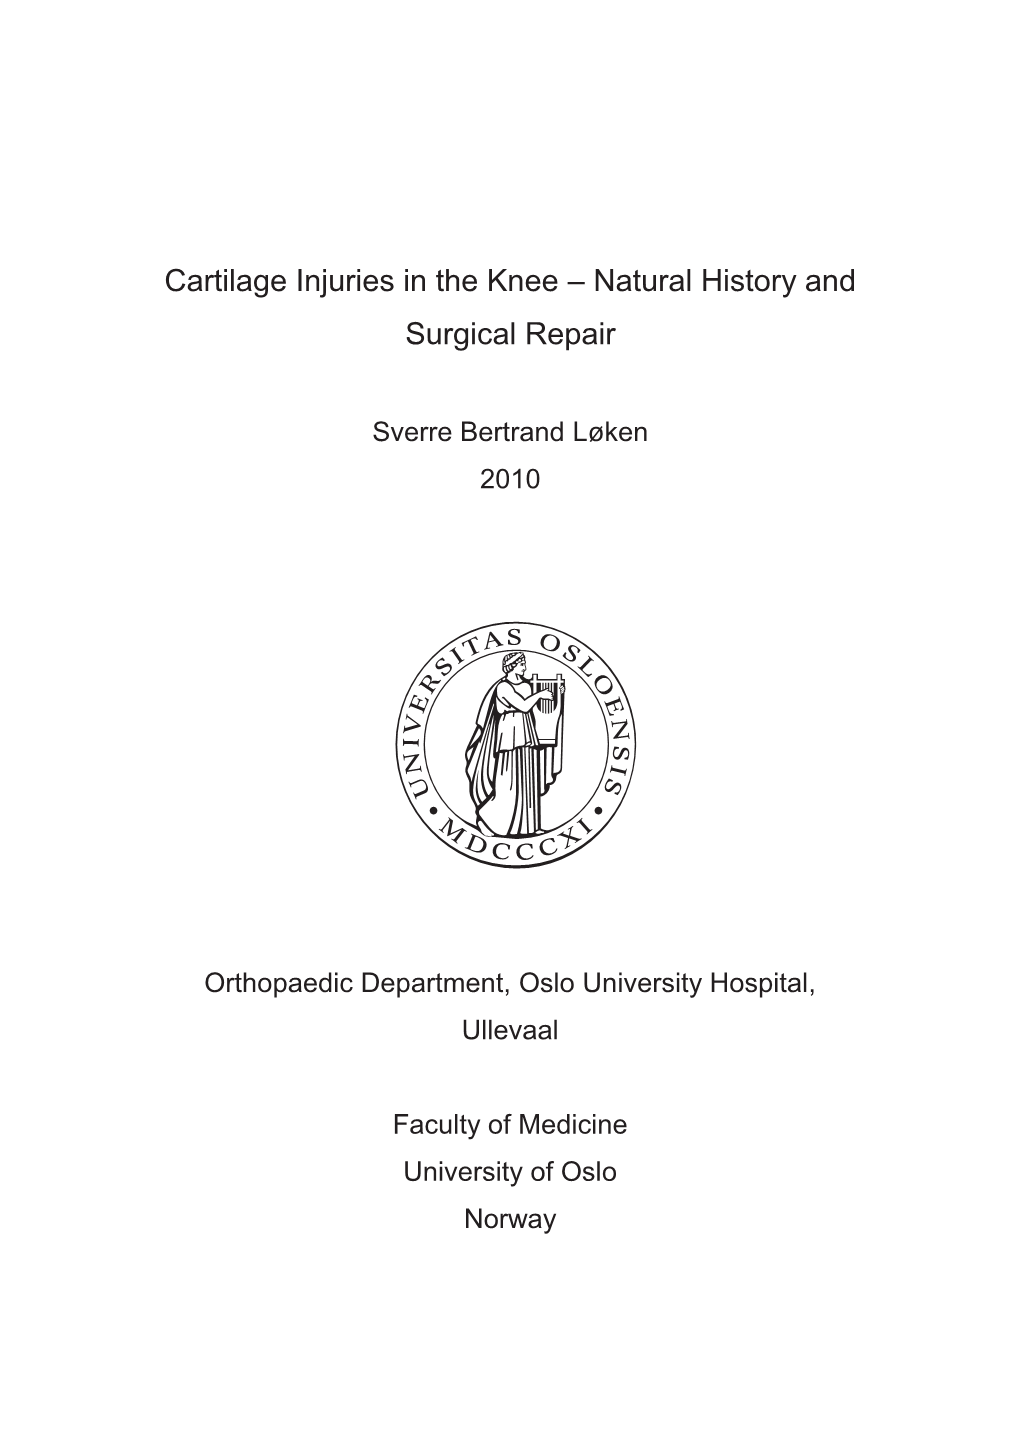 Cartilage Injuries in the Knee – Natural History and Surgical Repair